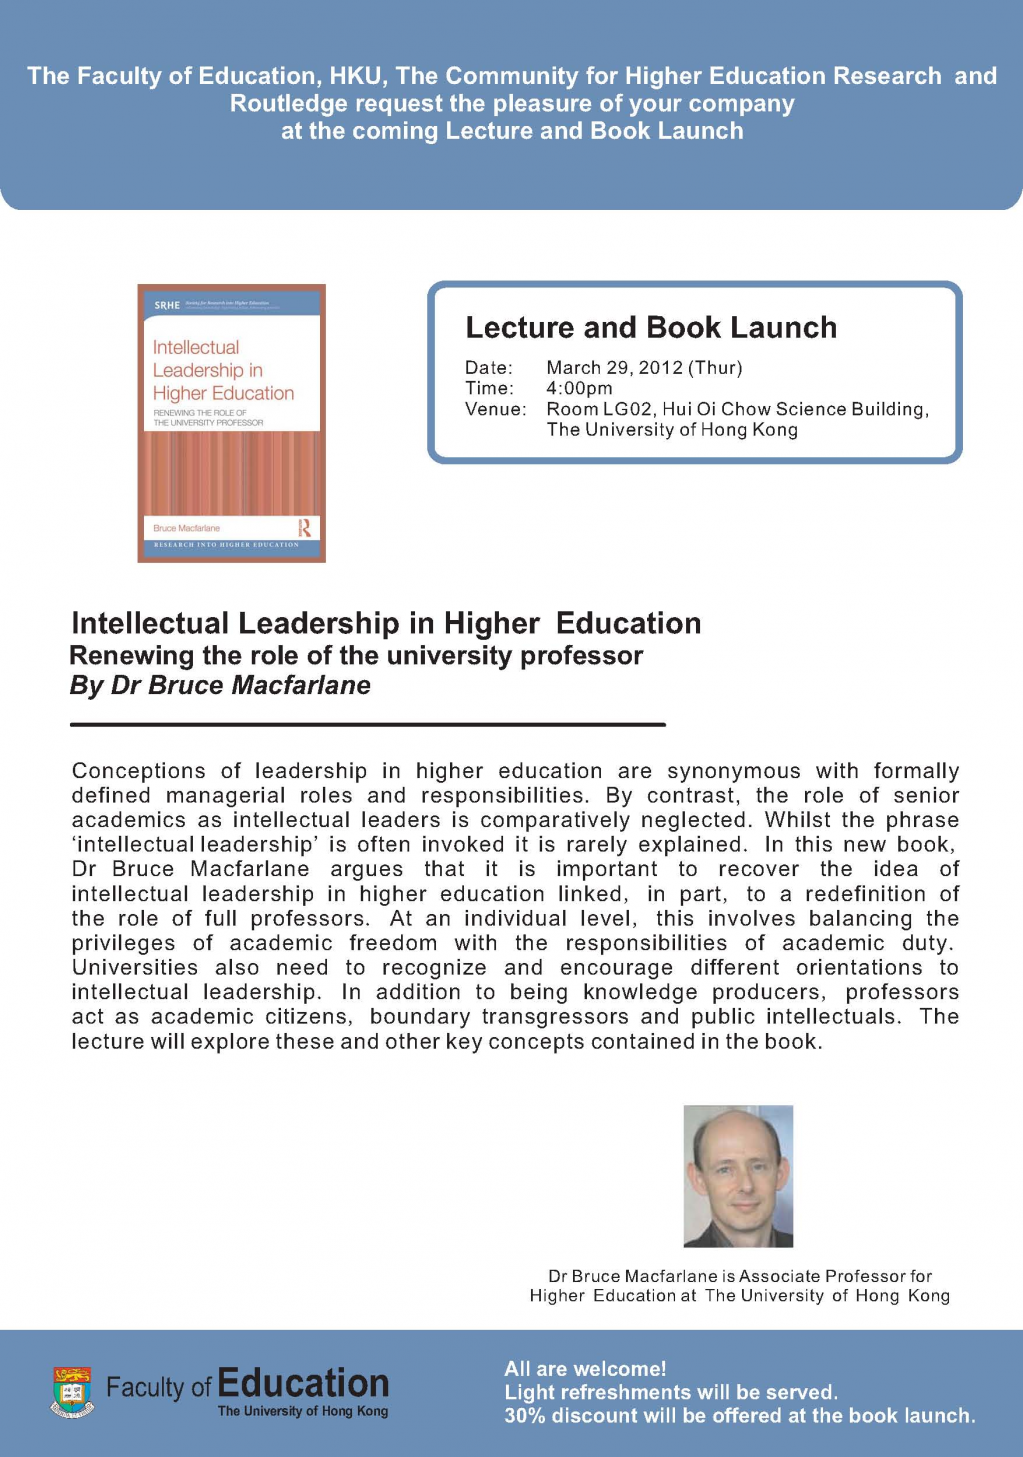 Lecture and Book Launch: Intellectual Leadership in Higher Education